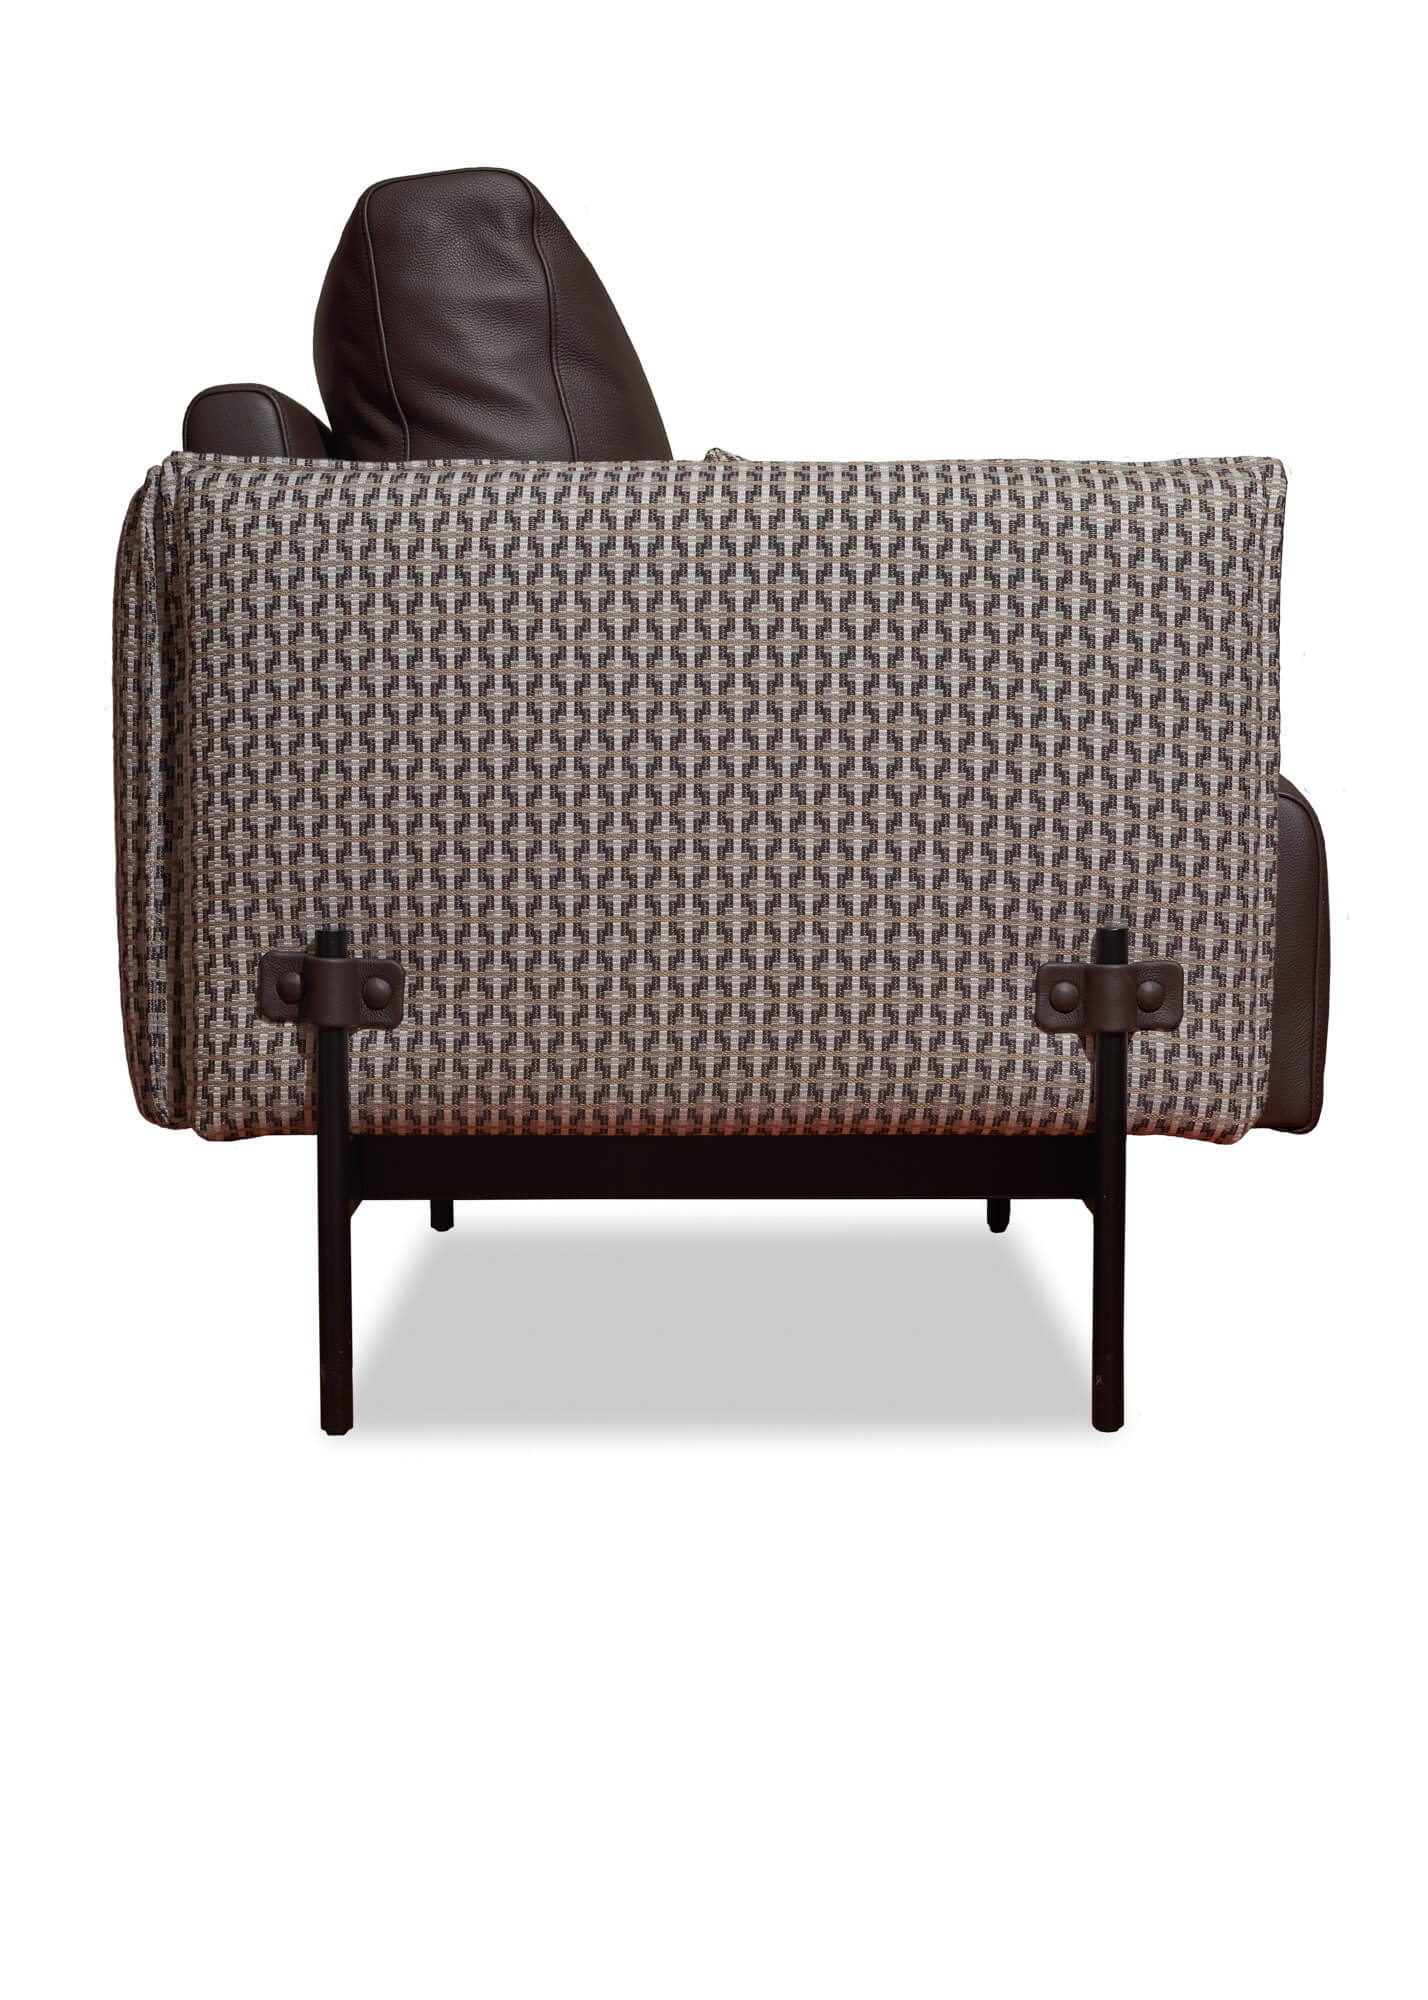 Infinitely practical and individually styled, this unique armchair features mixed upholstery in leather and fabric. A spray-coated steel frame creates a solid structure and support for this durable piece. 